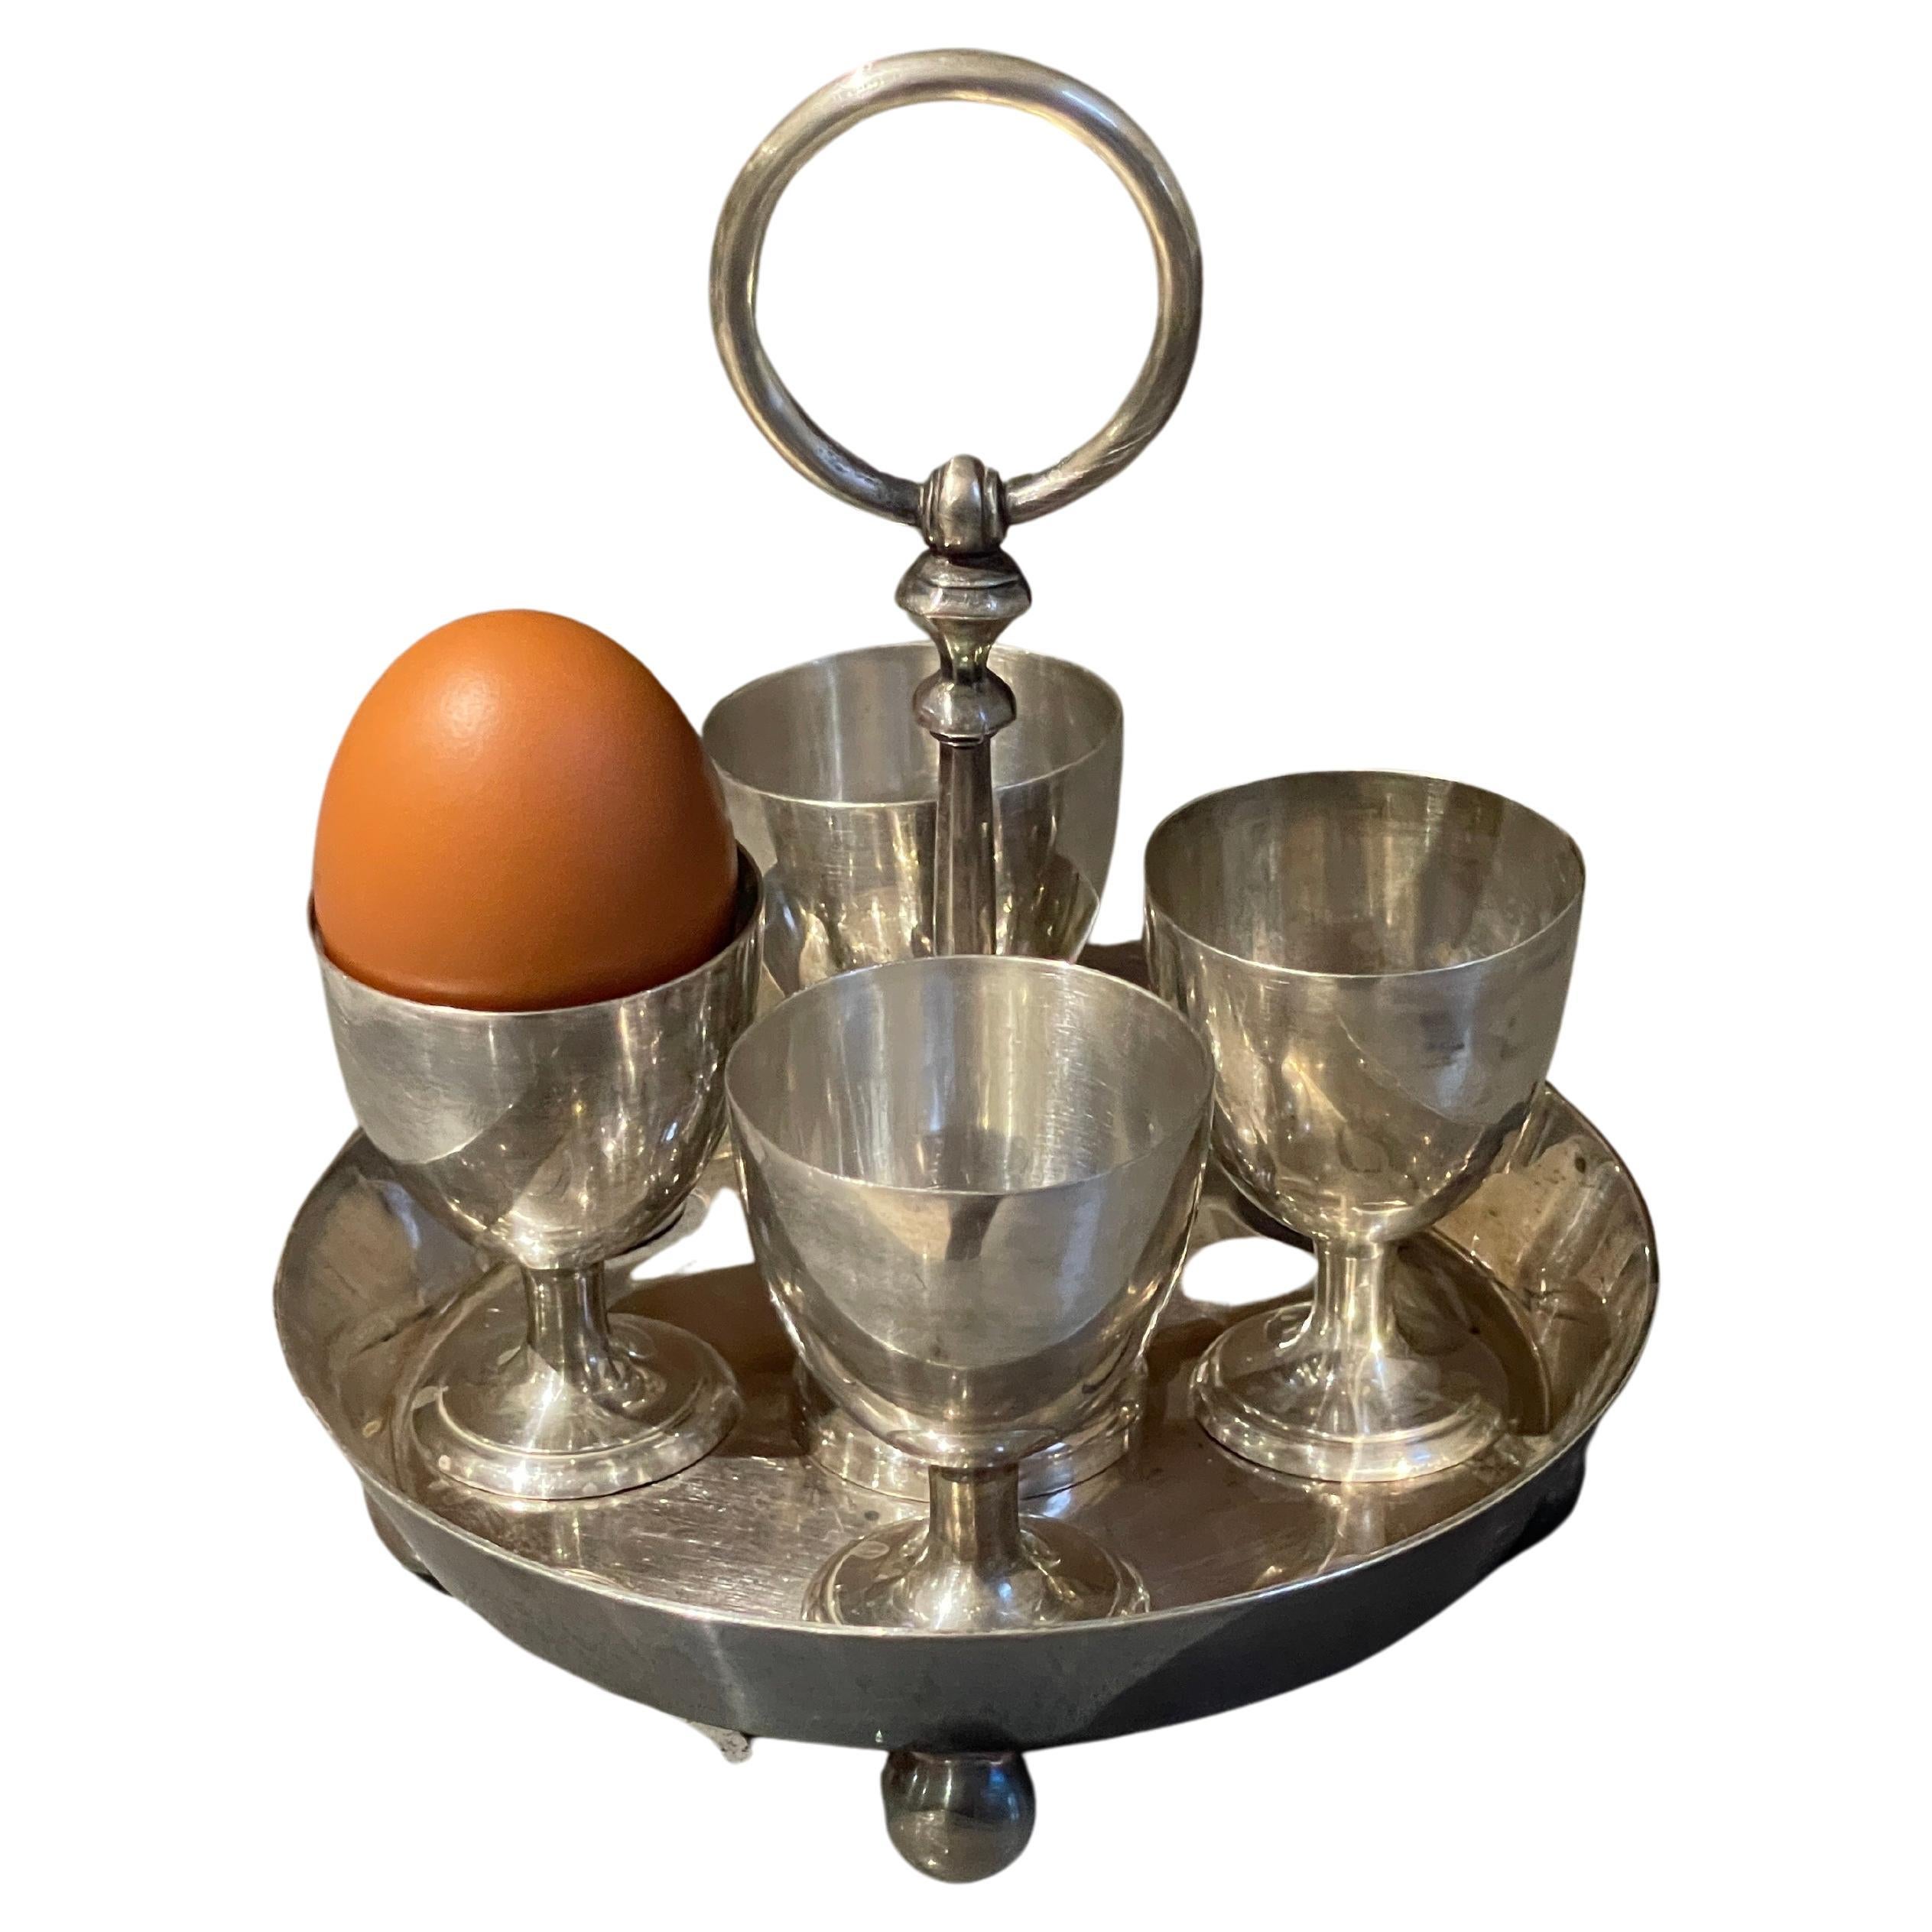 Mappling Princess Plate London and Sheffield silver egg coddler stand holder in art deco style from 1880 with four silver egg holders with four silver spoons. Four silver-plated spoons accompany it. The pierced egg holders measure 2 1/3'' in height